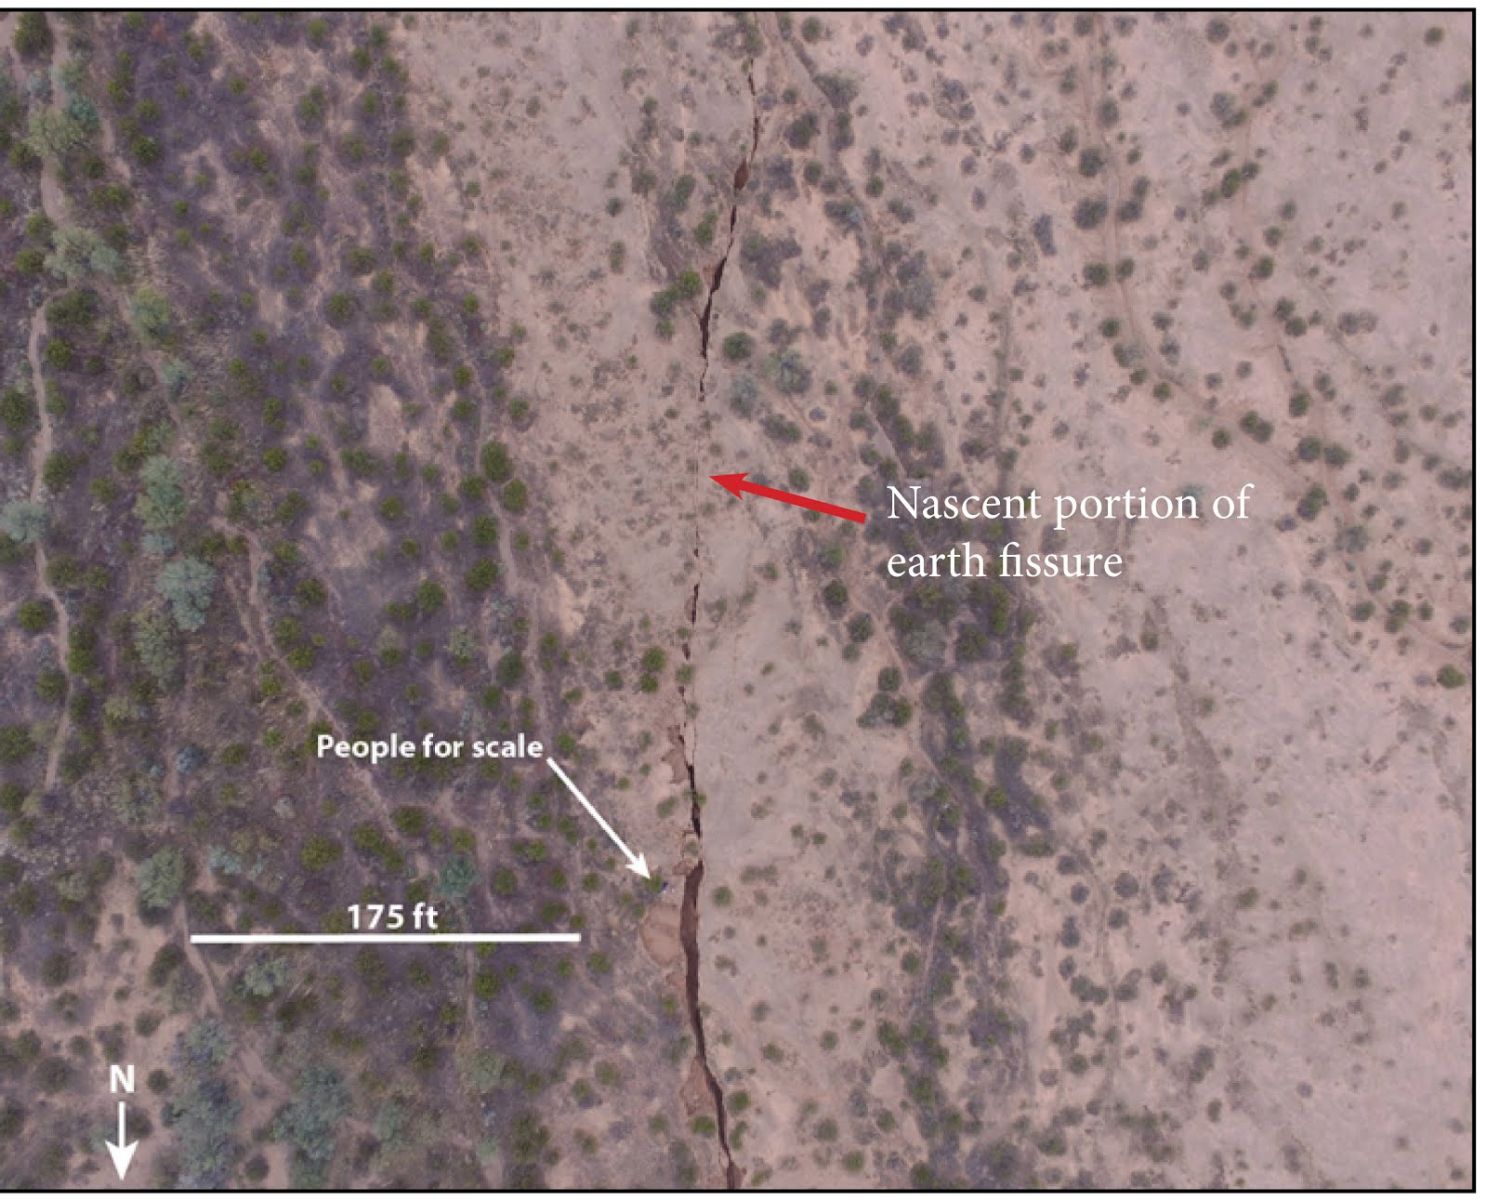 New earth fissure discovered in Arizona, January 2017